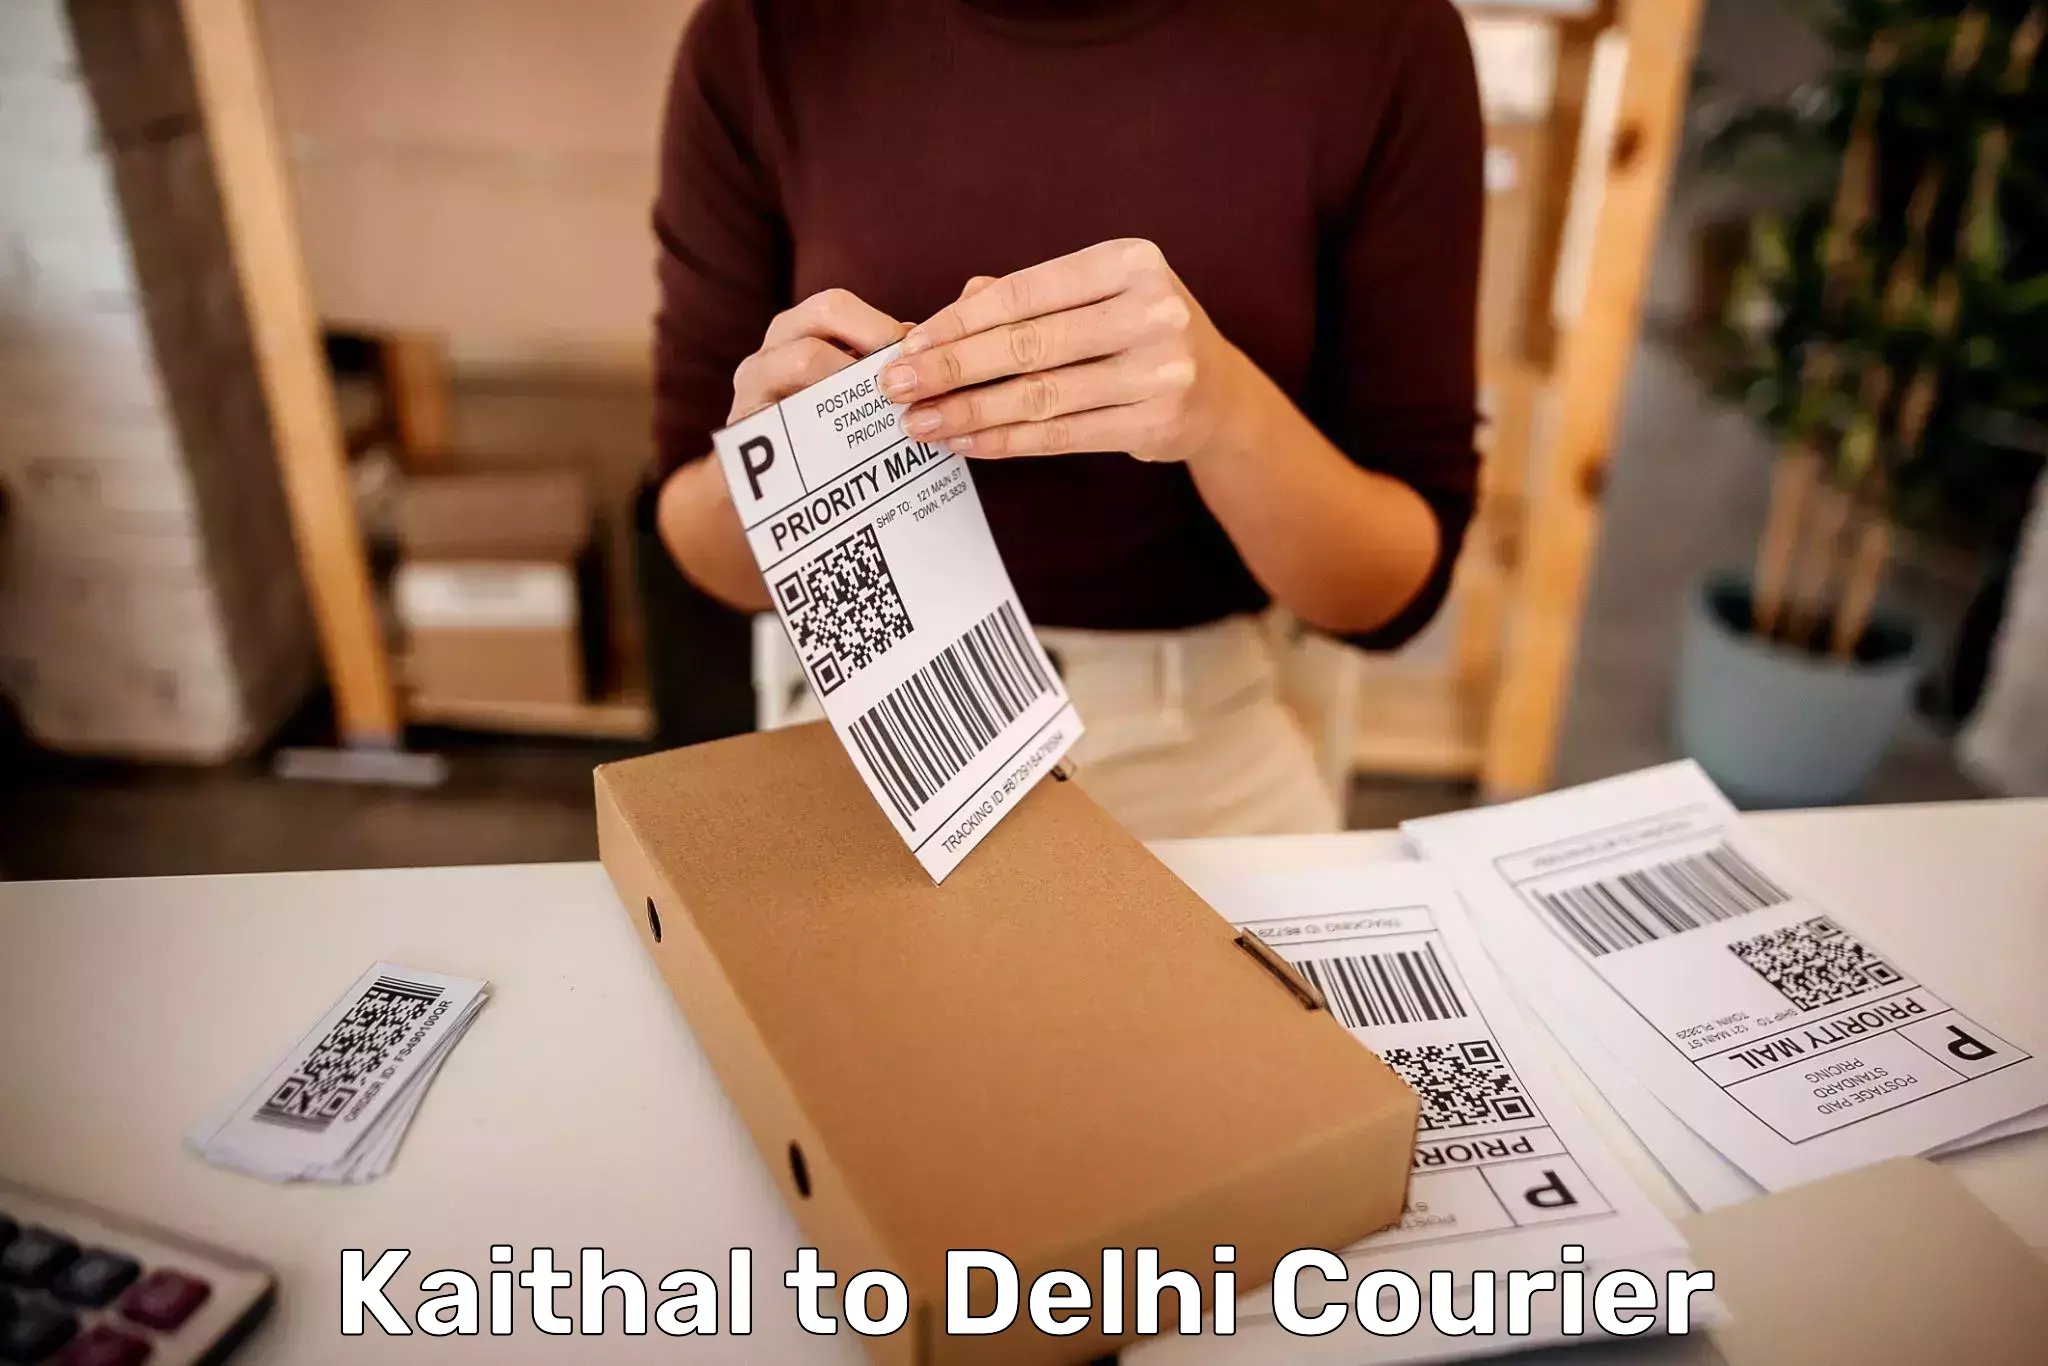 Luggage shipment specialists Kaithal to Lodhi Road